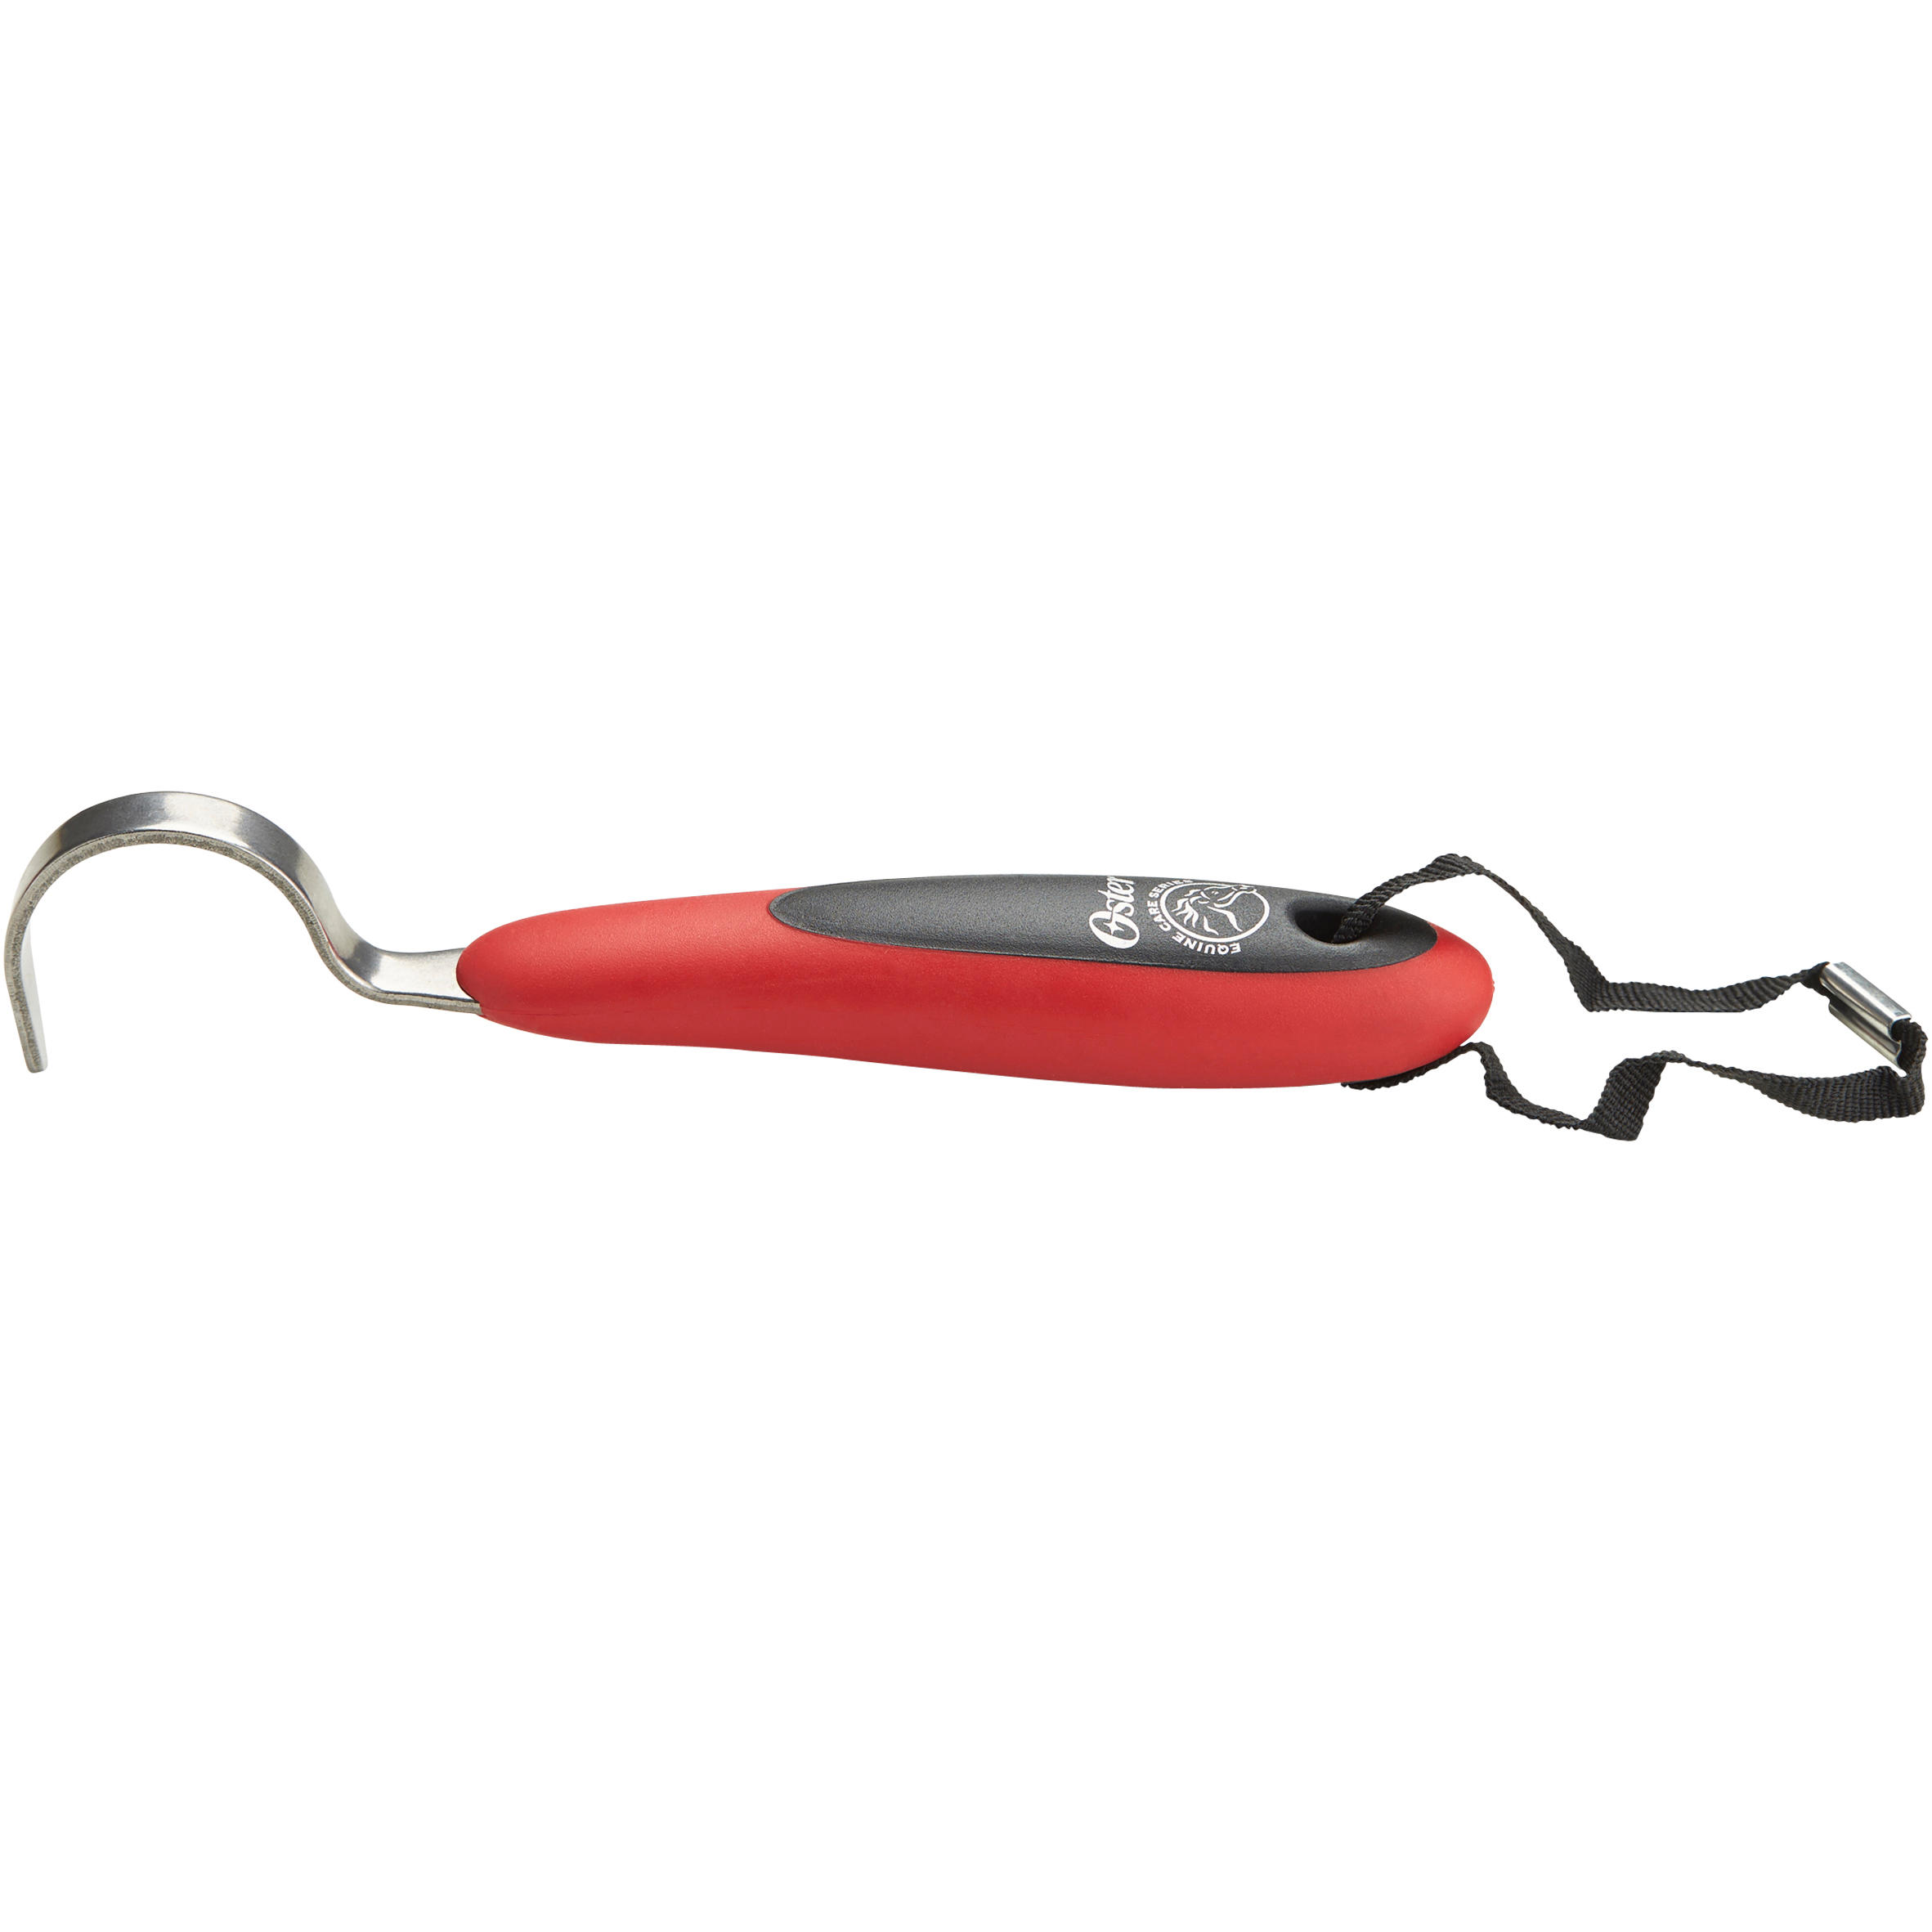 Horse Riding Hoof Pick - Red 6/6